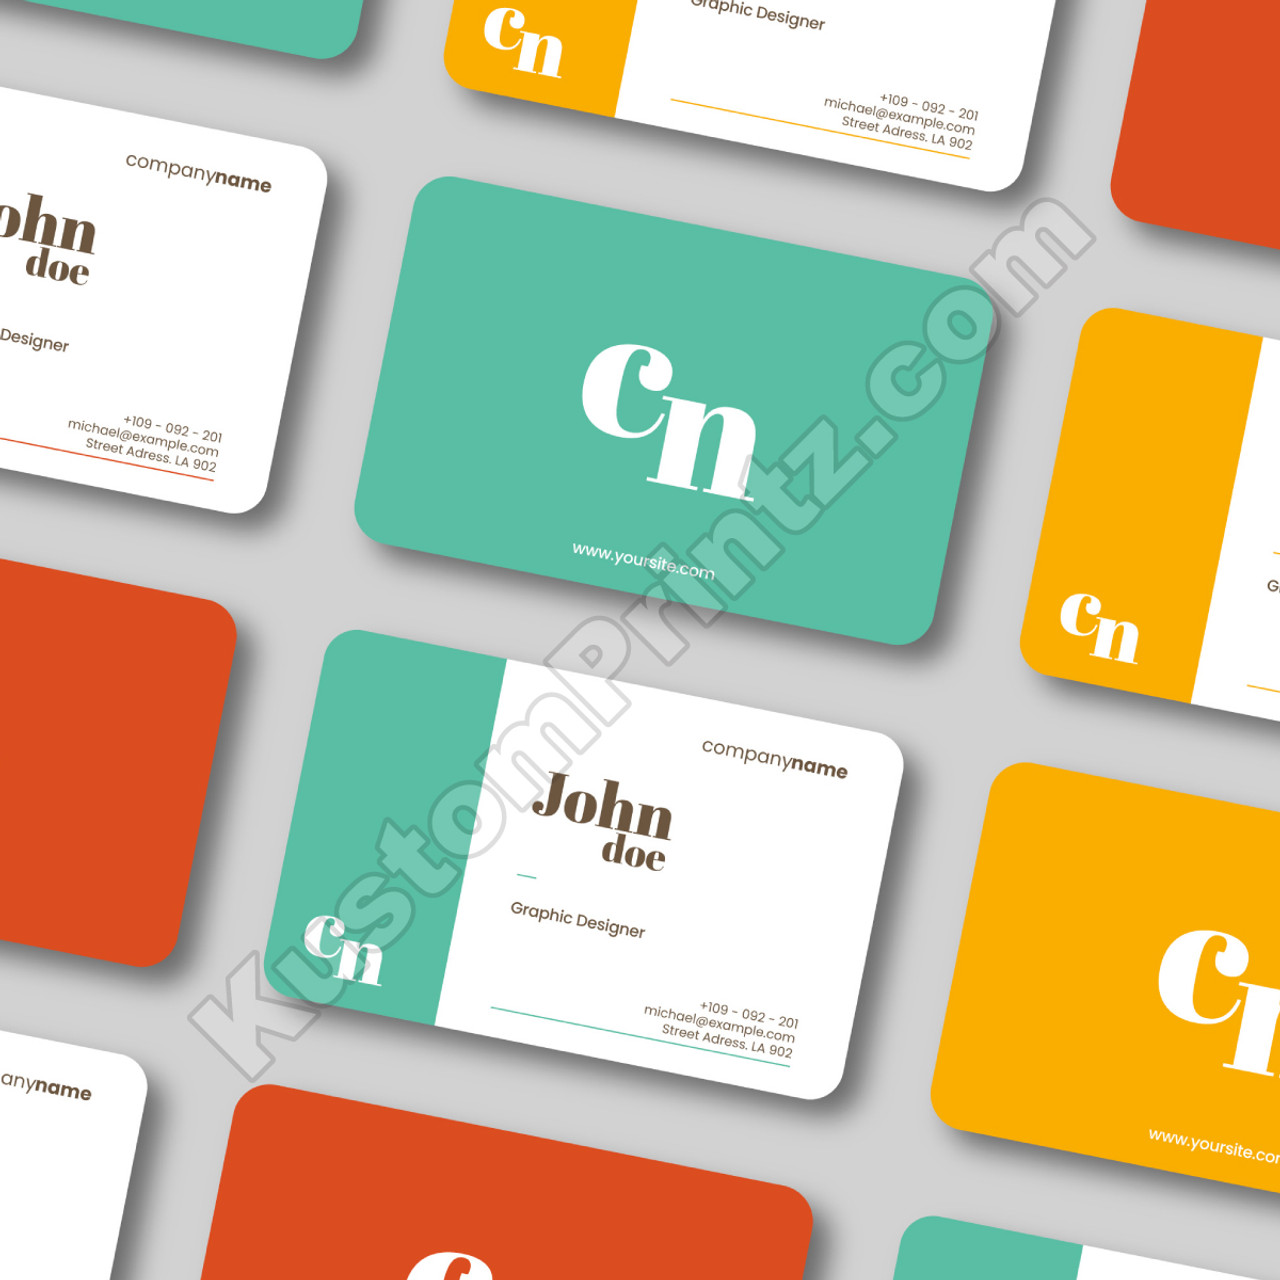 2500 Business Cards (Rounded Corners)